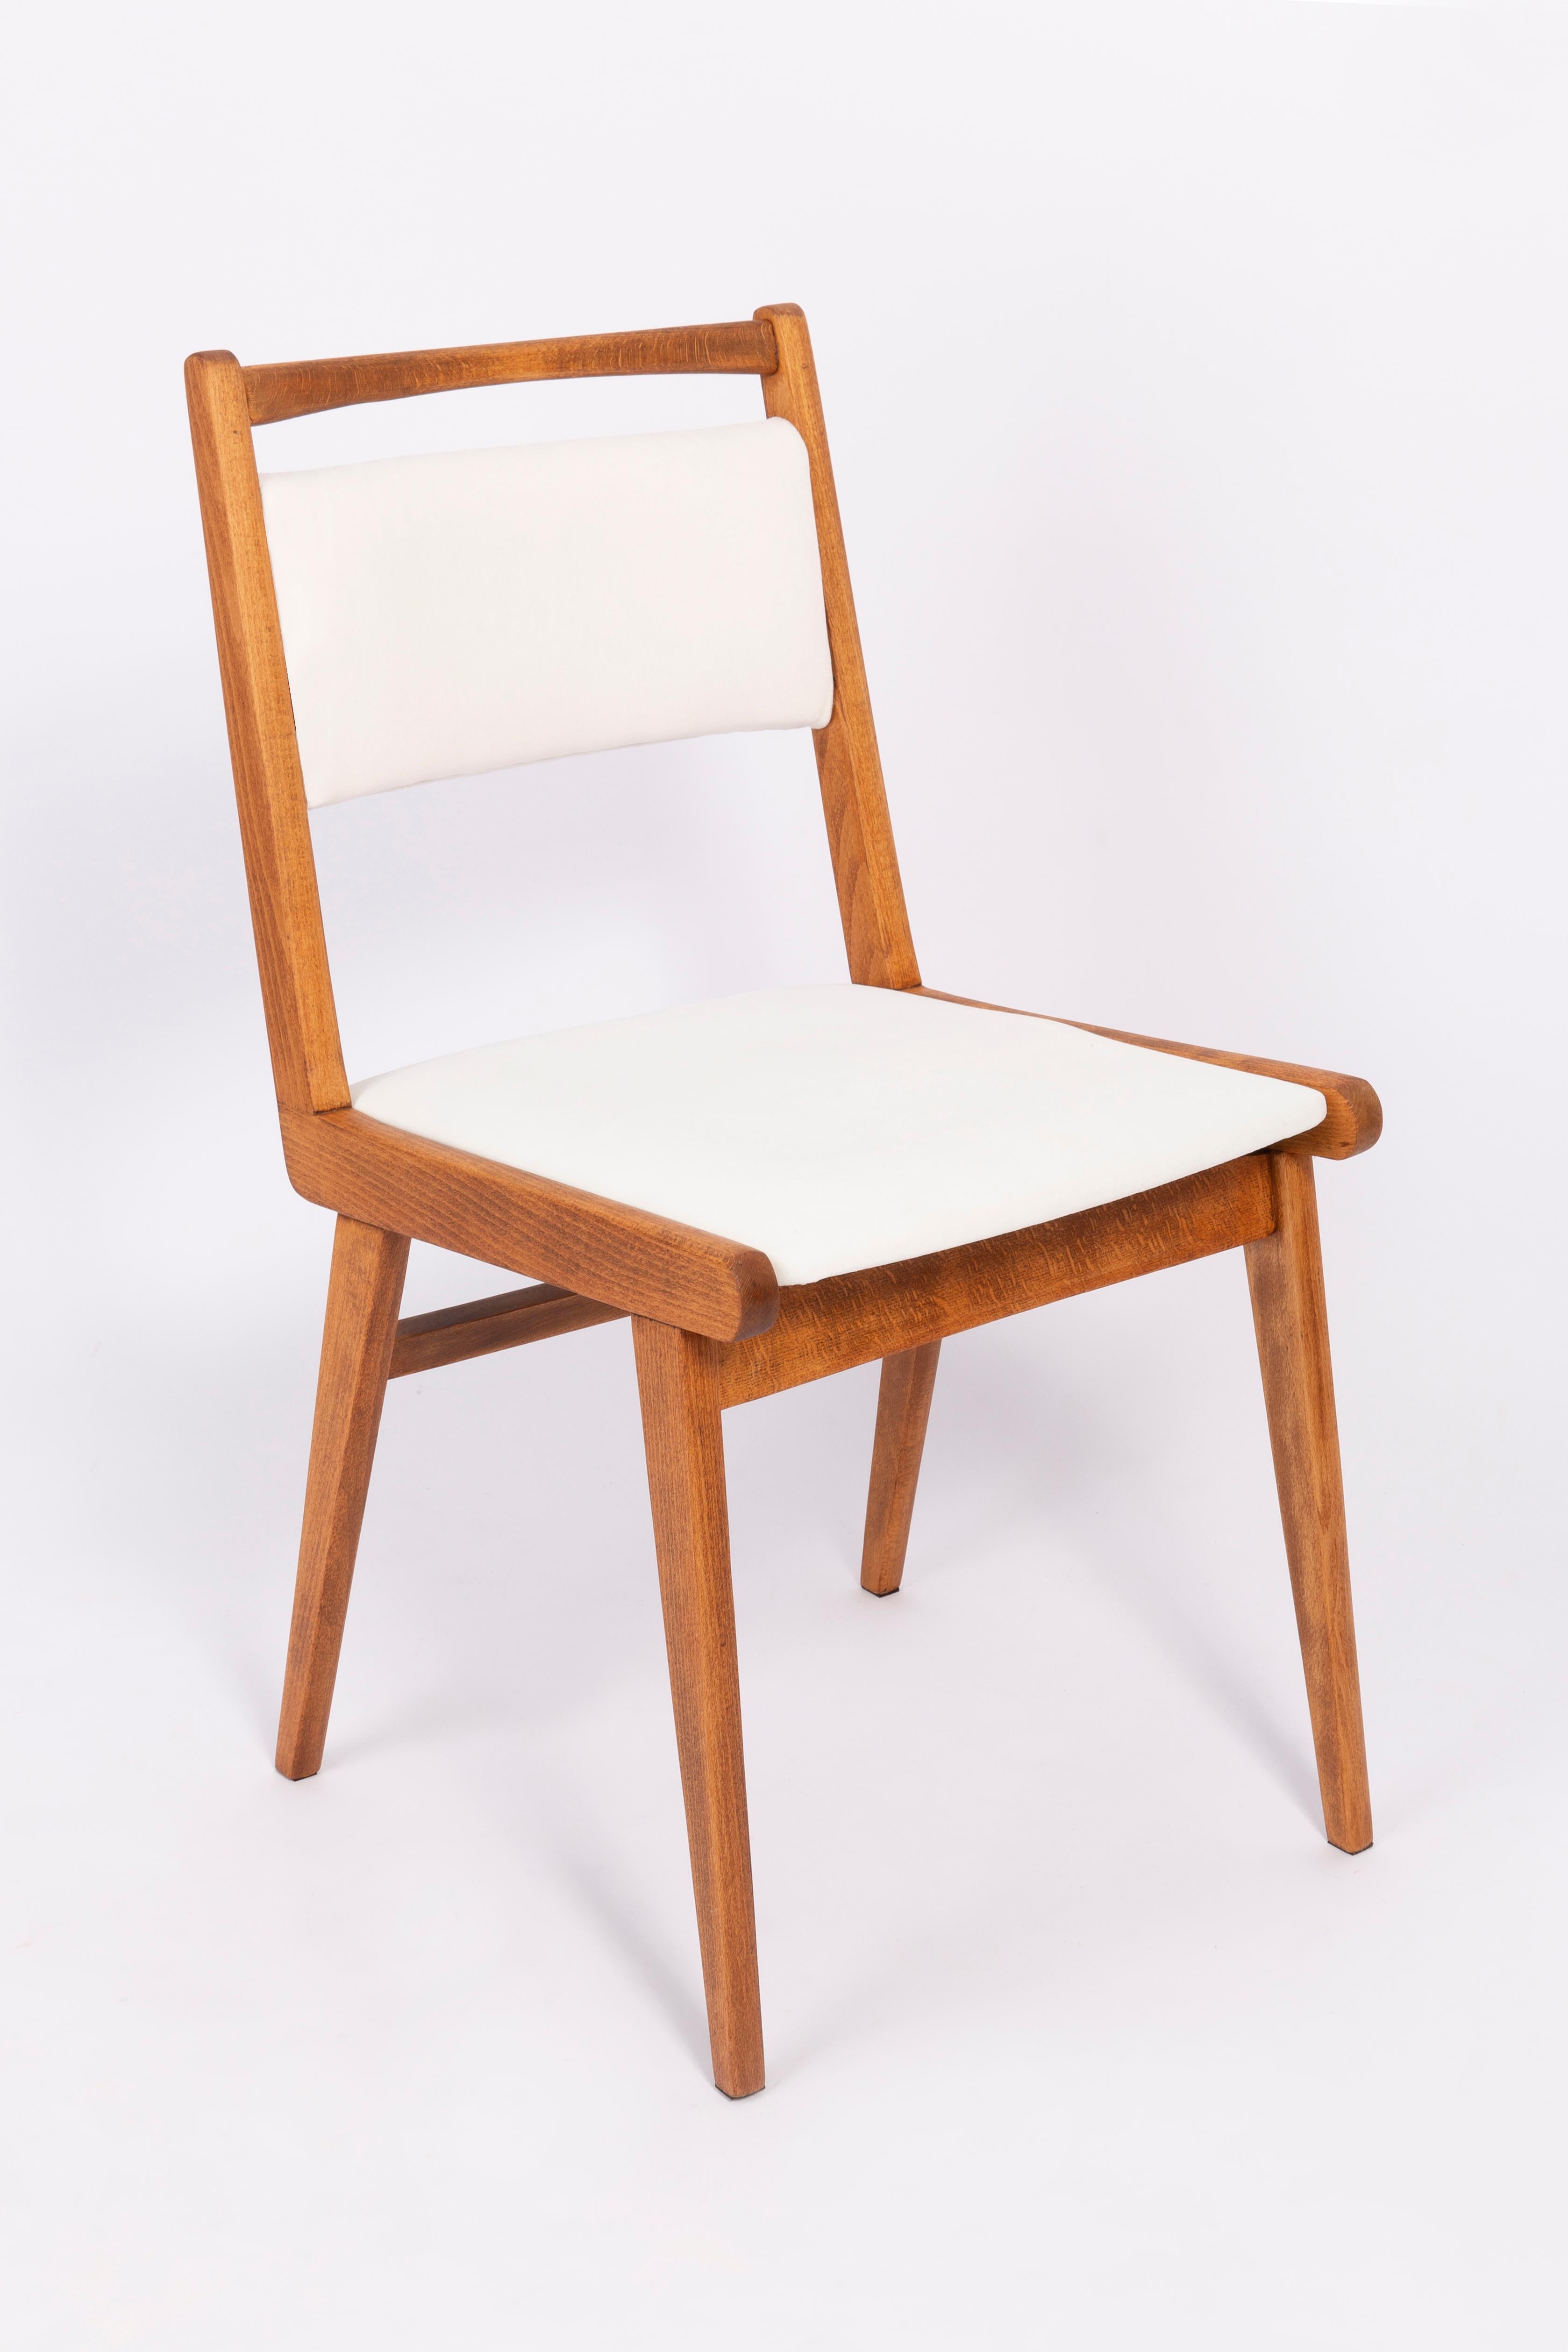 Chairs designed by Prof. Rajmund Halas. It is JAR type model. Made of beechwood. Chairs are after a complete upholstery renovation, the woodwork has been refreshed. Seat and back is dressed in a red and white, durable and pleasant to the touch